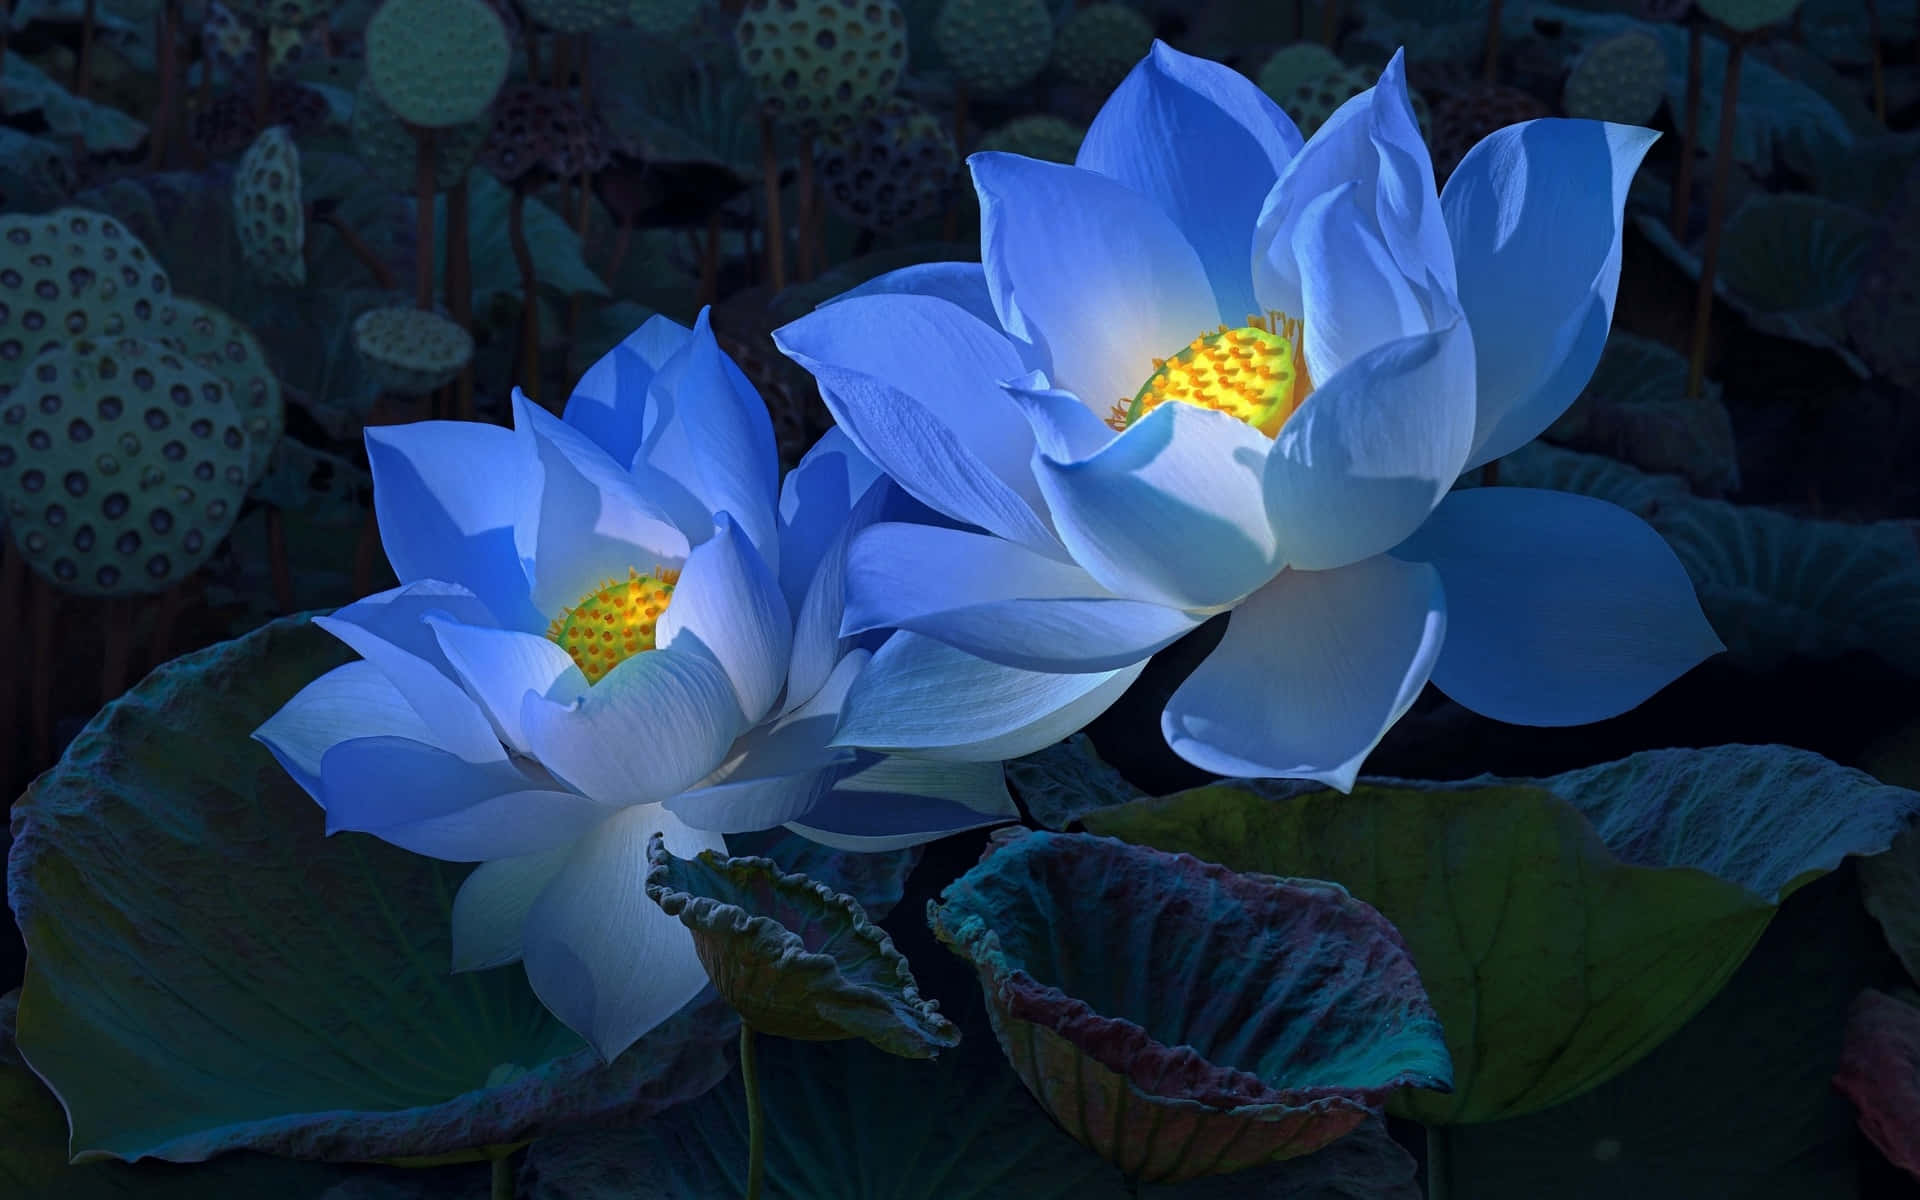 A gorgeous and serene lotus flower in bloom.